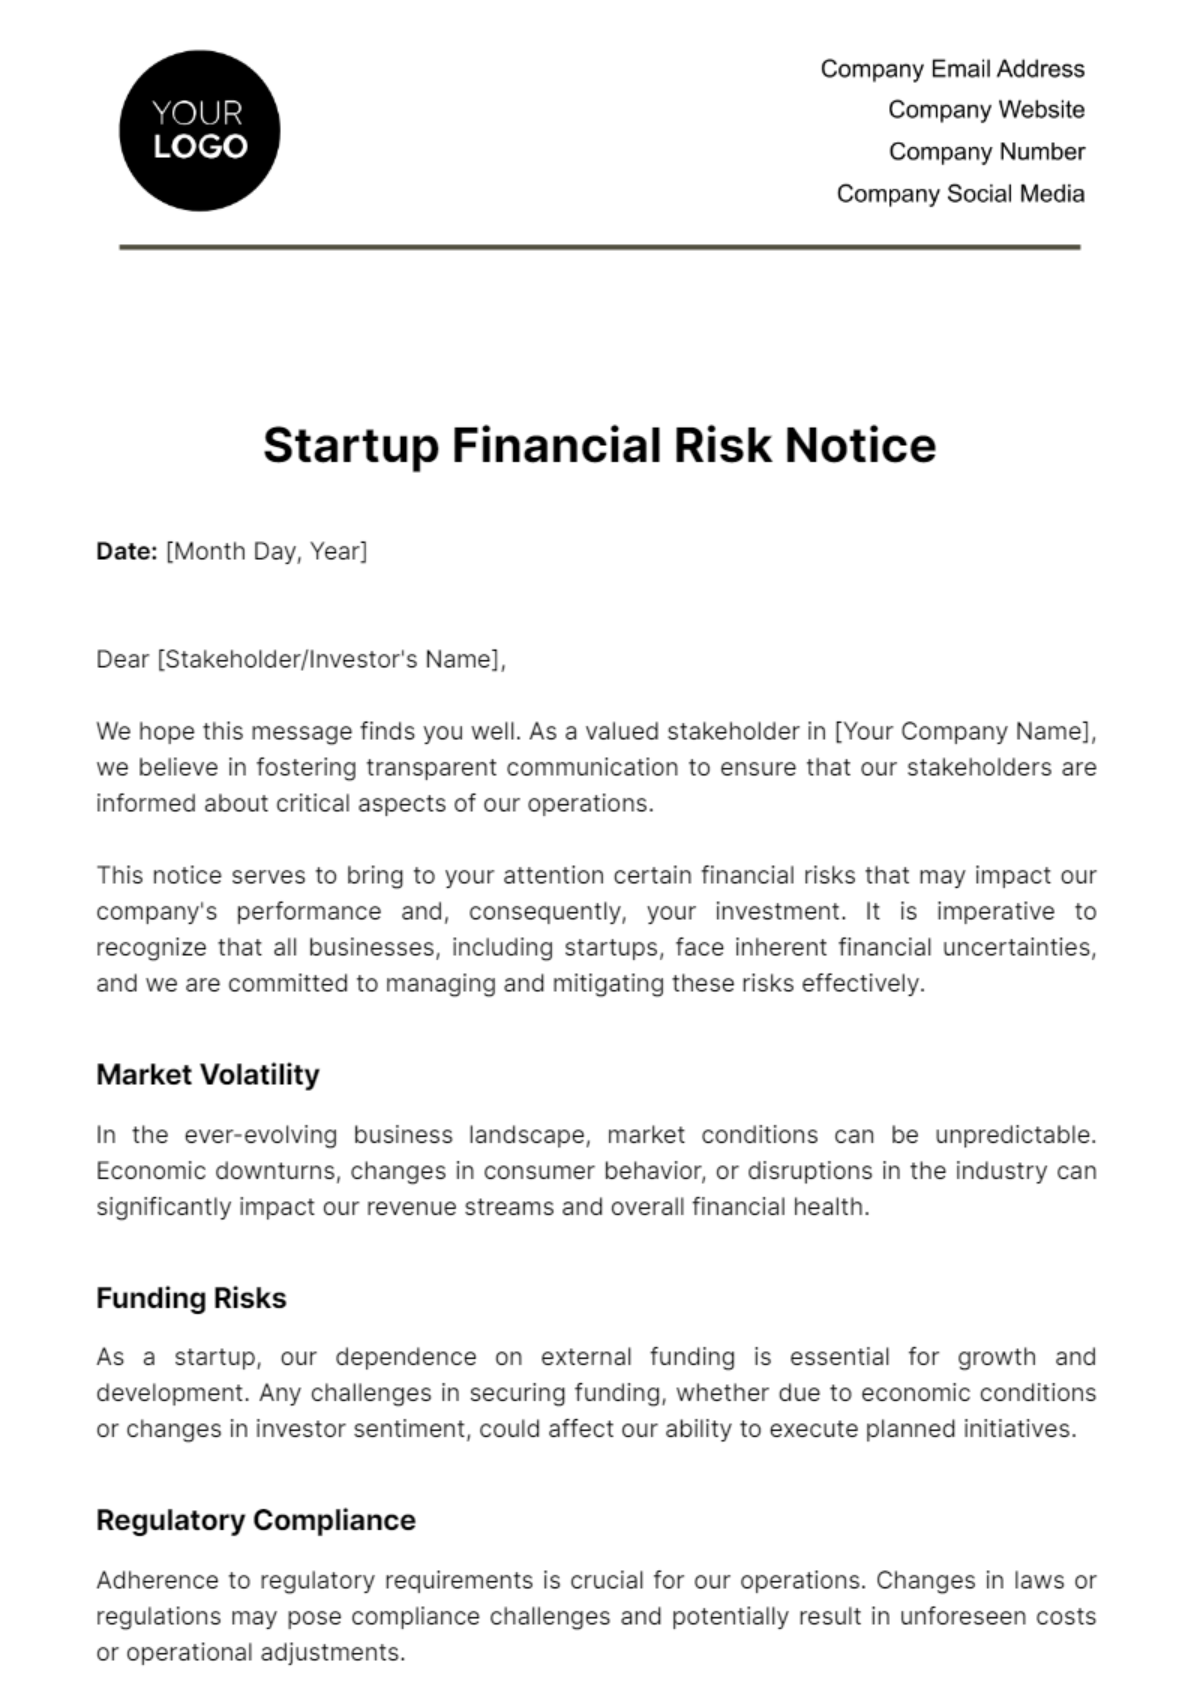 Startup Financial Risk Notice Template